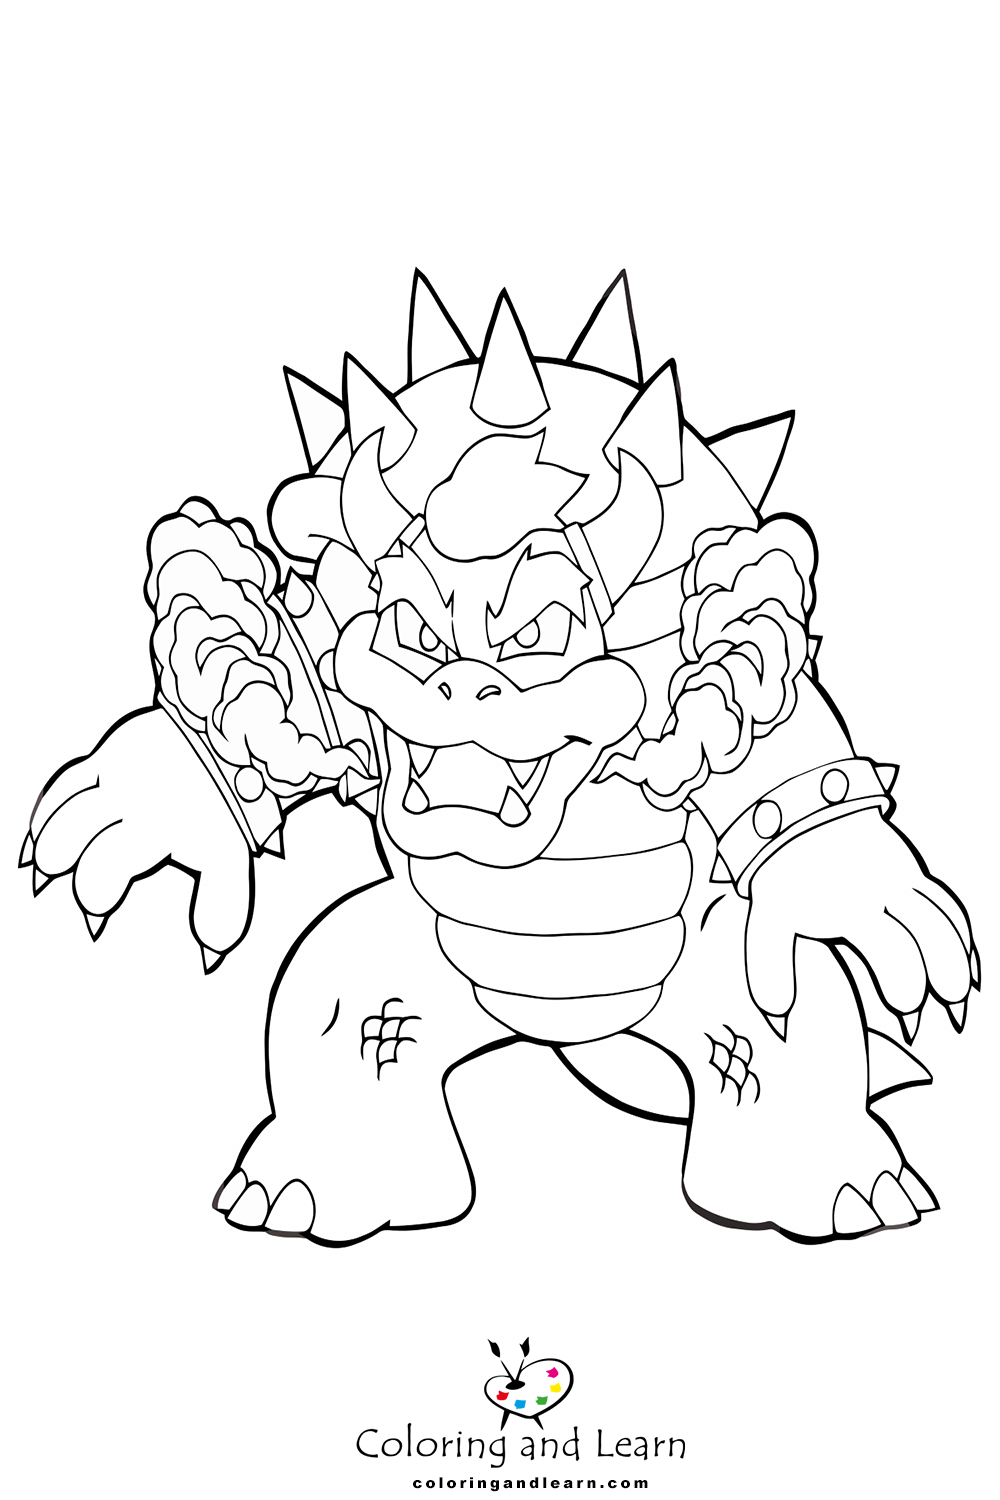 Bowser Coloring Pages - Best Coloring Pages For Kids  Super mario coloring  pages, Mario coloring pages, Super coloring pages